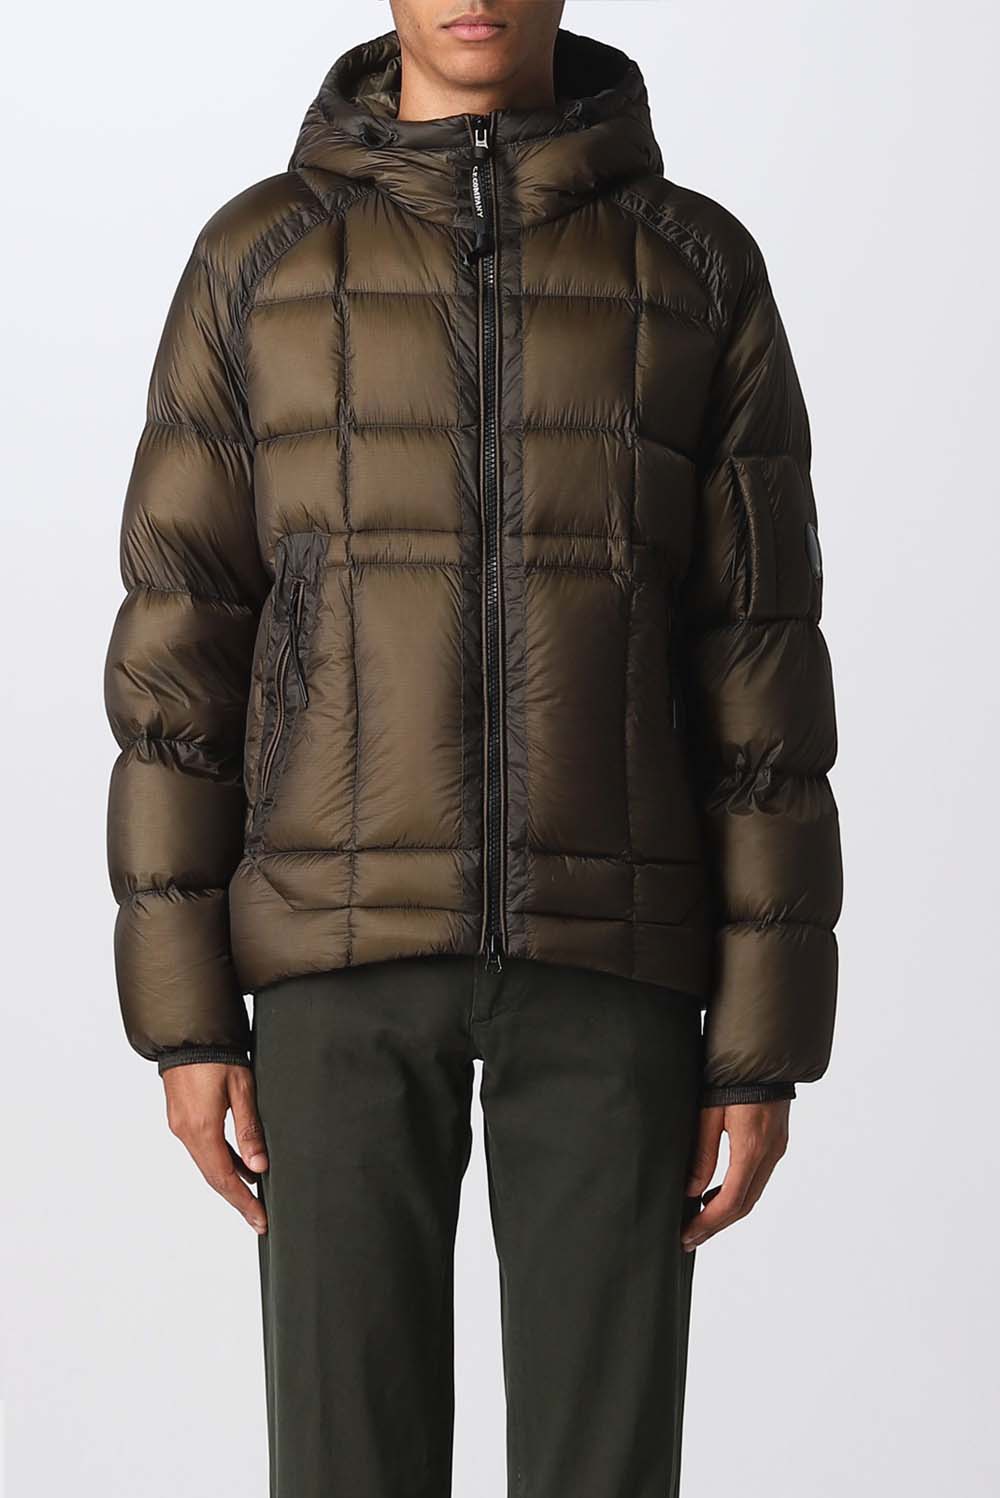  Cp Company Shell Hooded Down Jacket 683 Ivy Green Uomo - 1